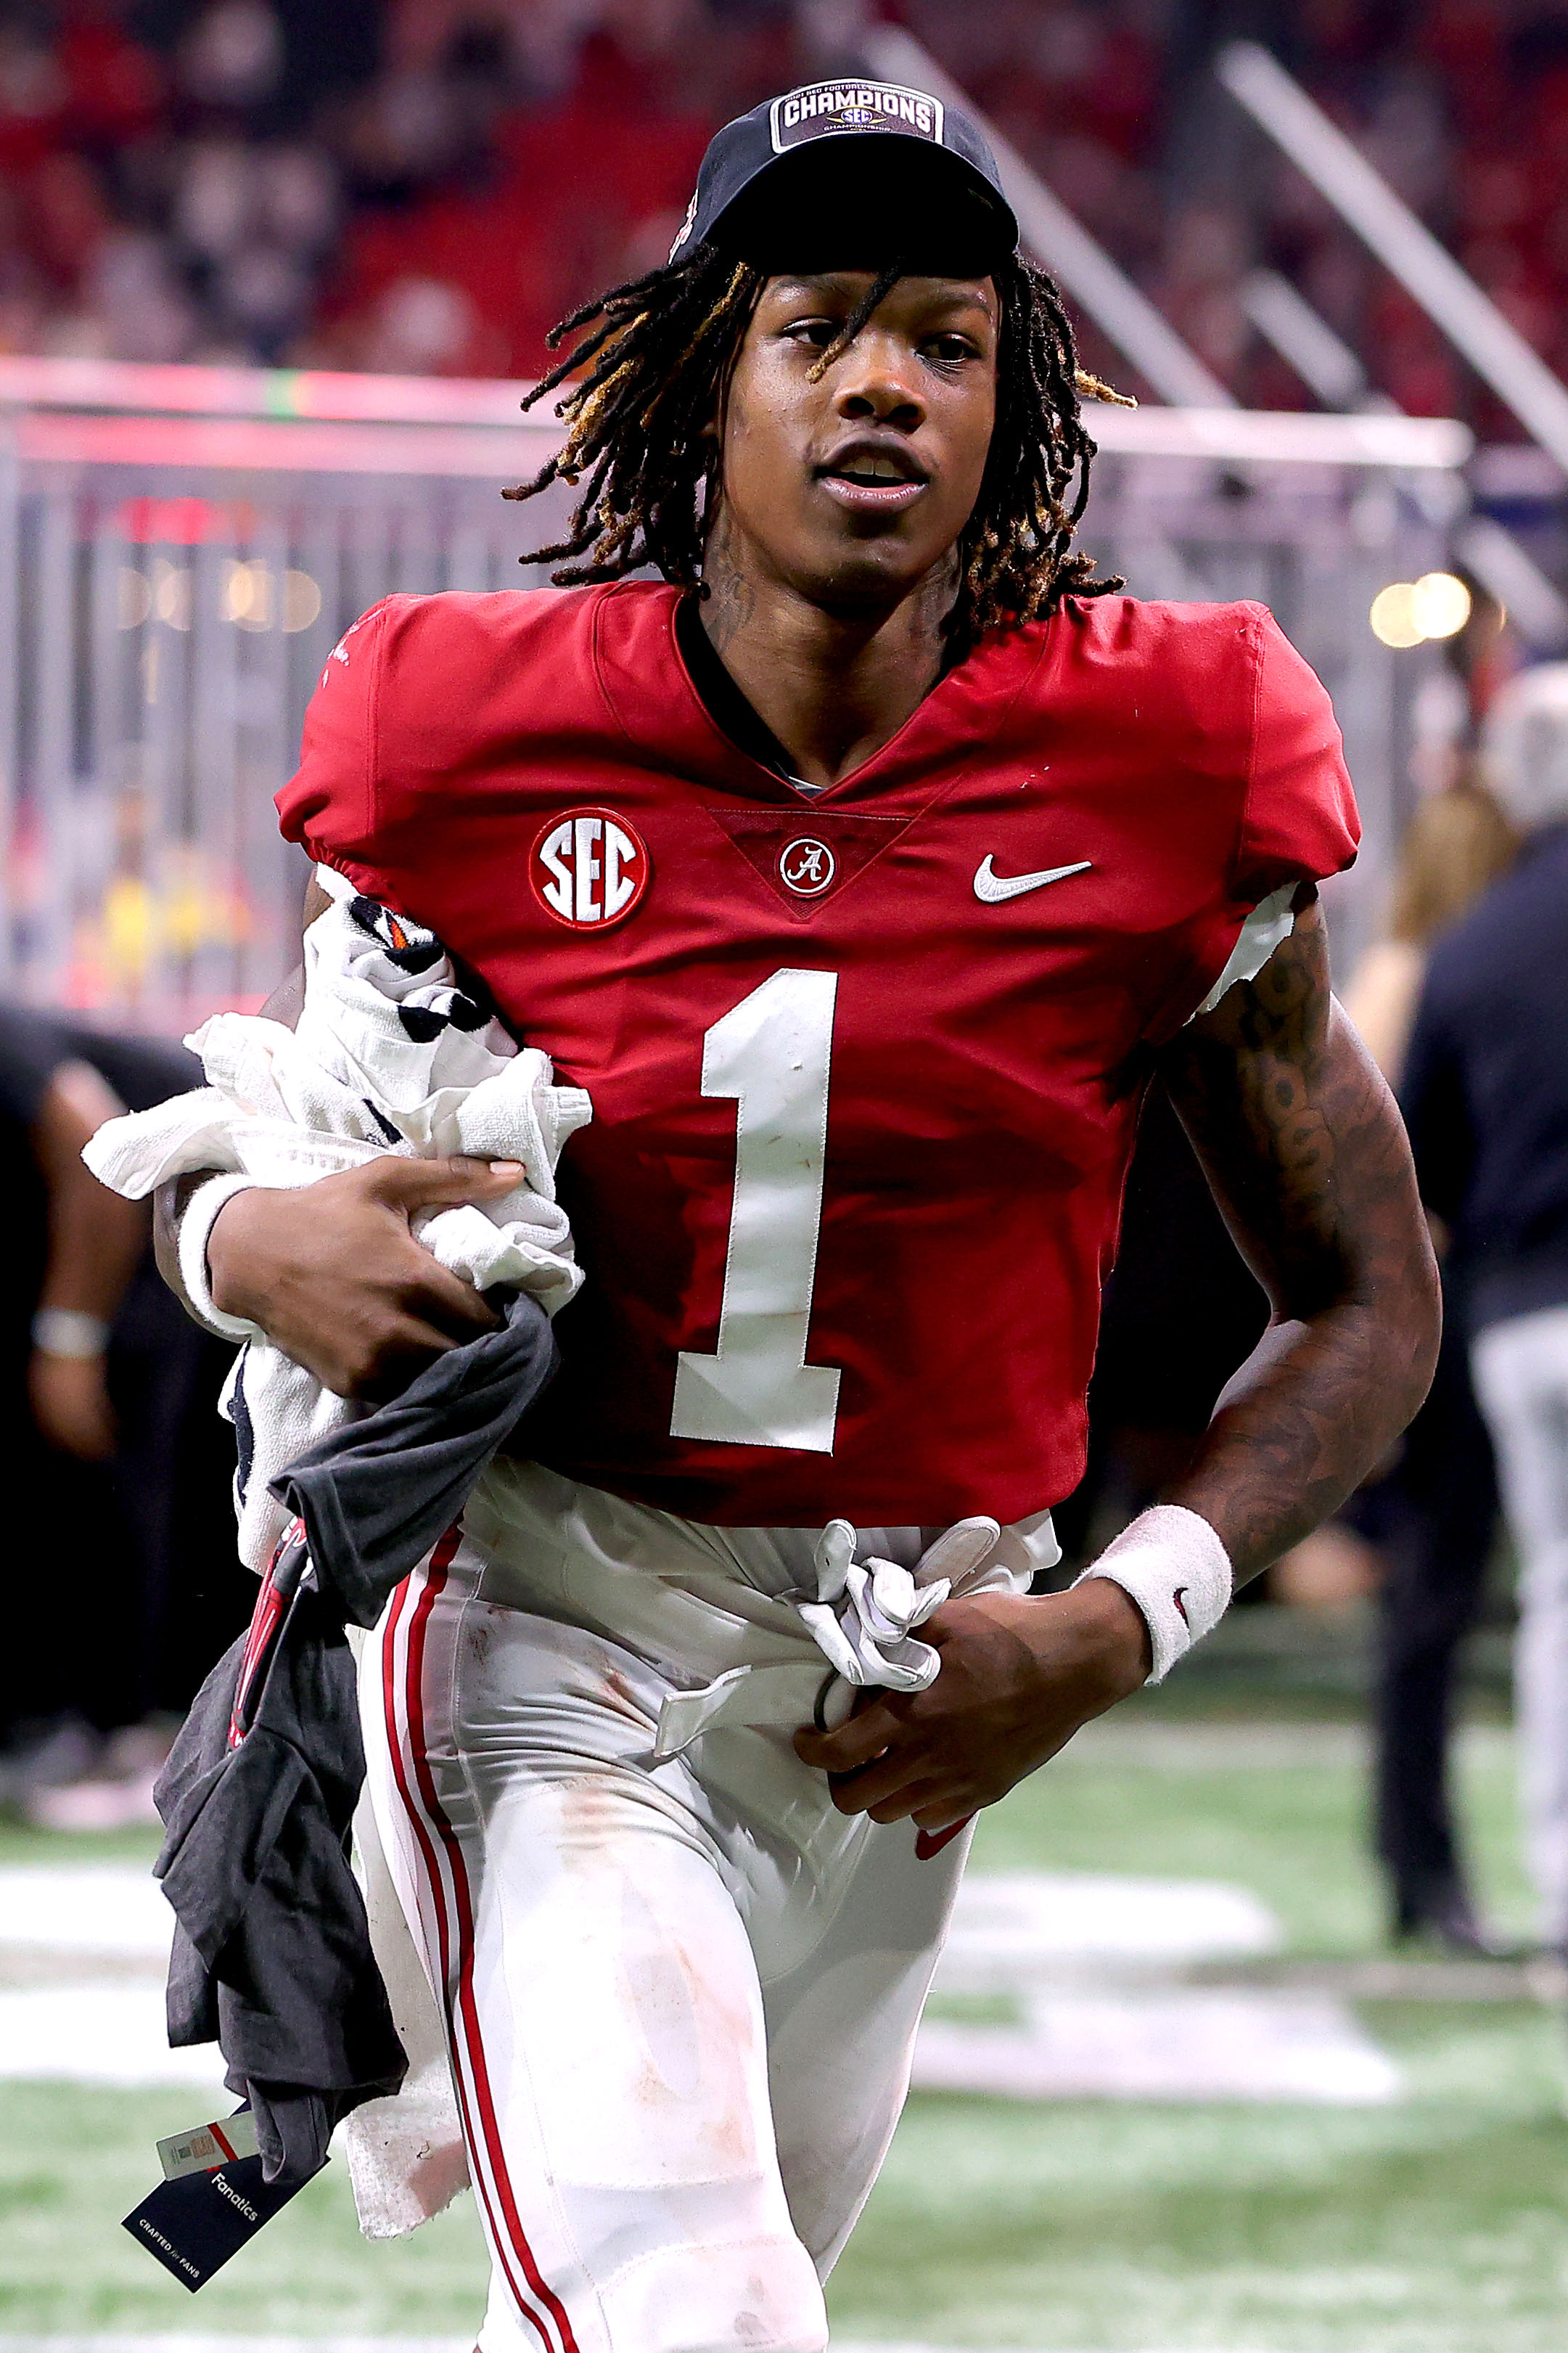 College Football Playoff  Motown Bound Alabama Football receiver Jameson  Williams who is coming off backtoback CFBPlayoff NationalChampionship  appearances has been selected 12th overall in the NFLDraft by the Detroit  Lions 